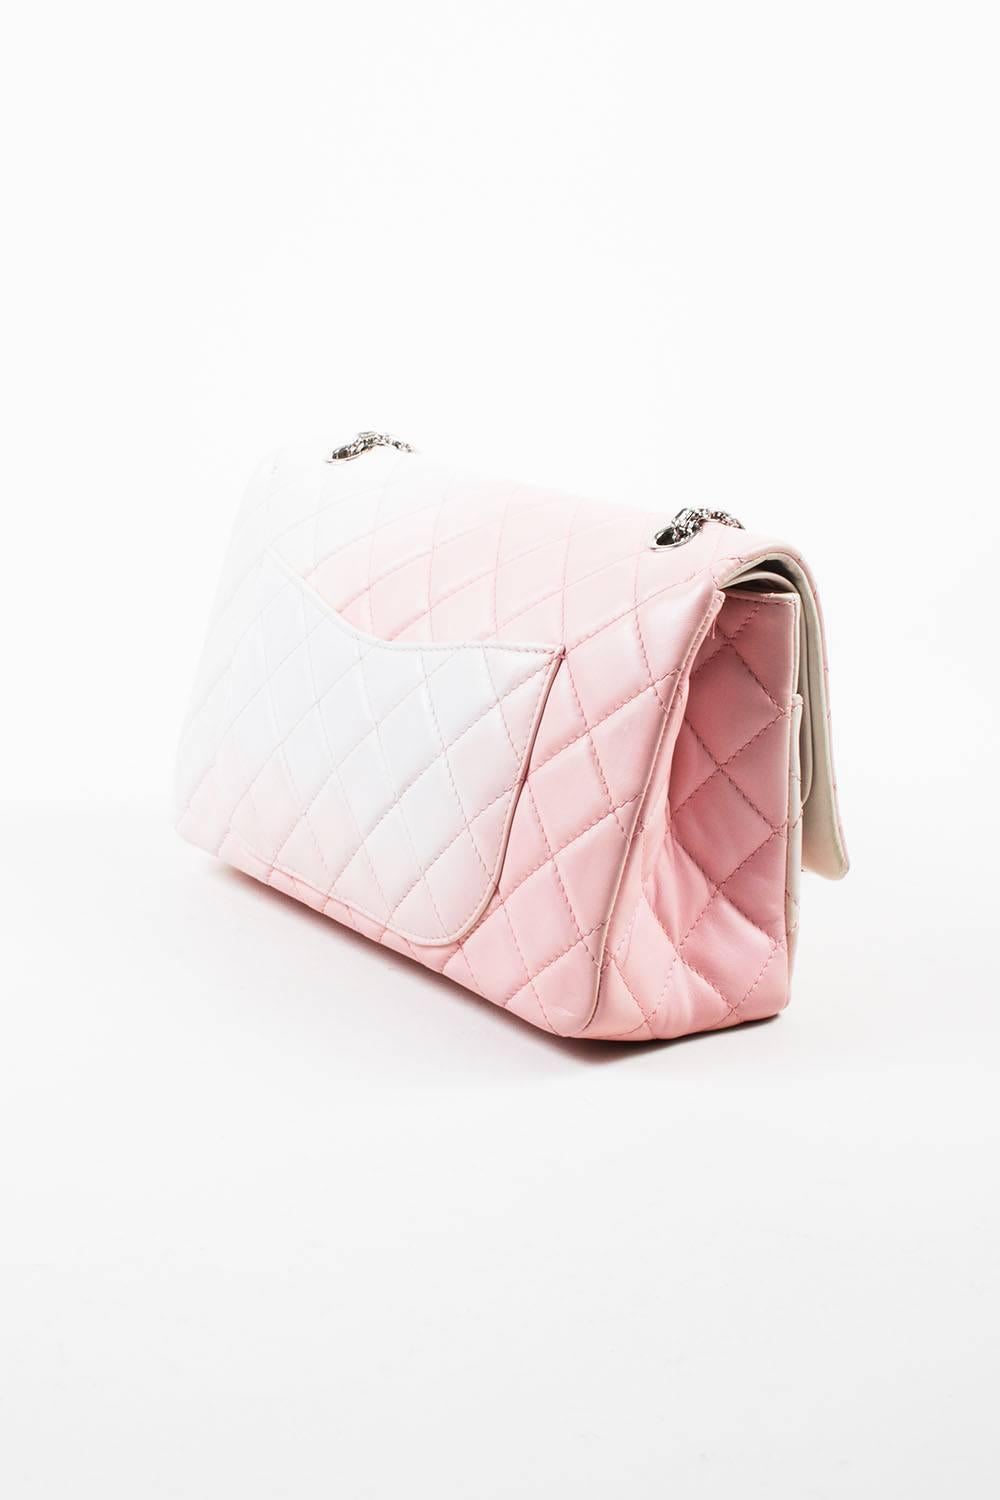 This pastel colored "2.55 Reissue 227" bag oozes classic Chanel with a unique feminine twist. From the spring 2009 collection. Buttery soft lightly padded lambskin leather. Ombre color pattern. Diamond quilted stitching throughout.